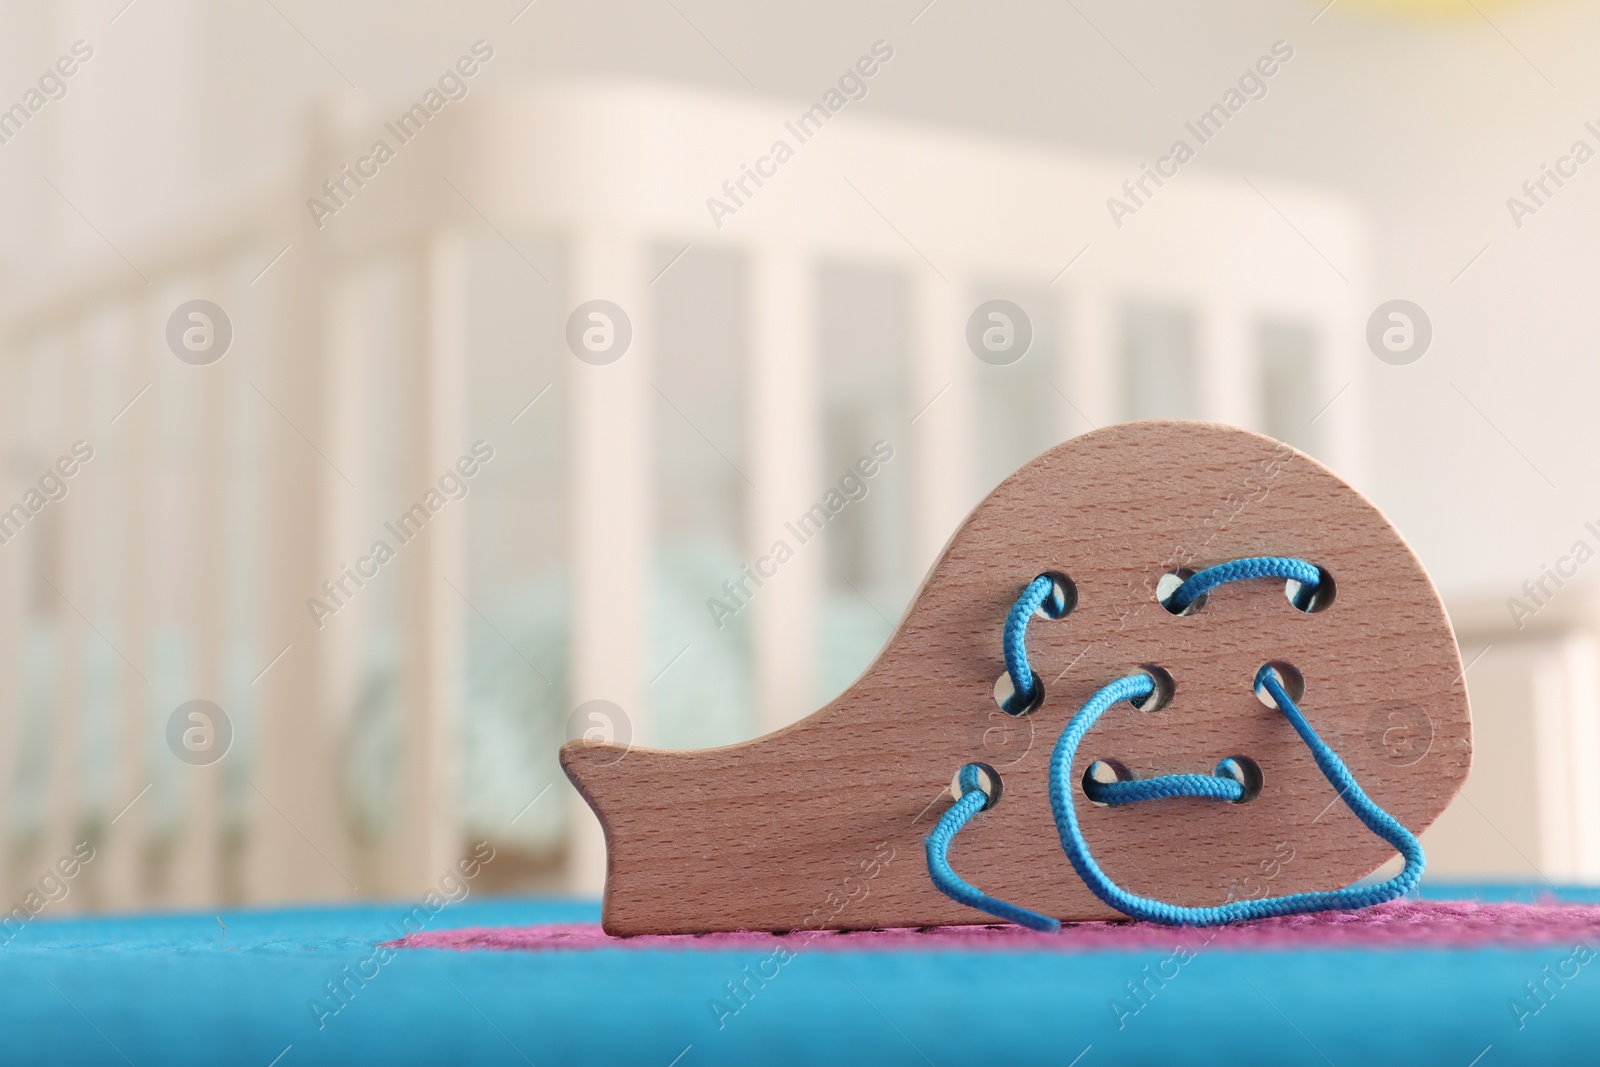 Photo of Motor skills development. Wooden lacing toy on color mat indoors, space for text